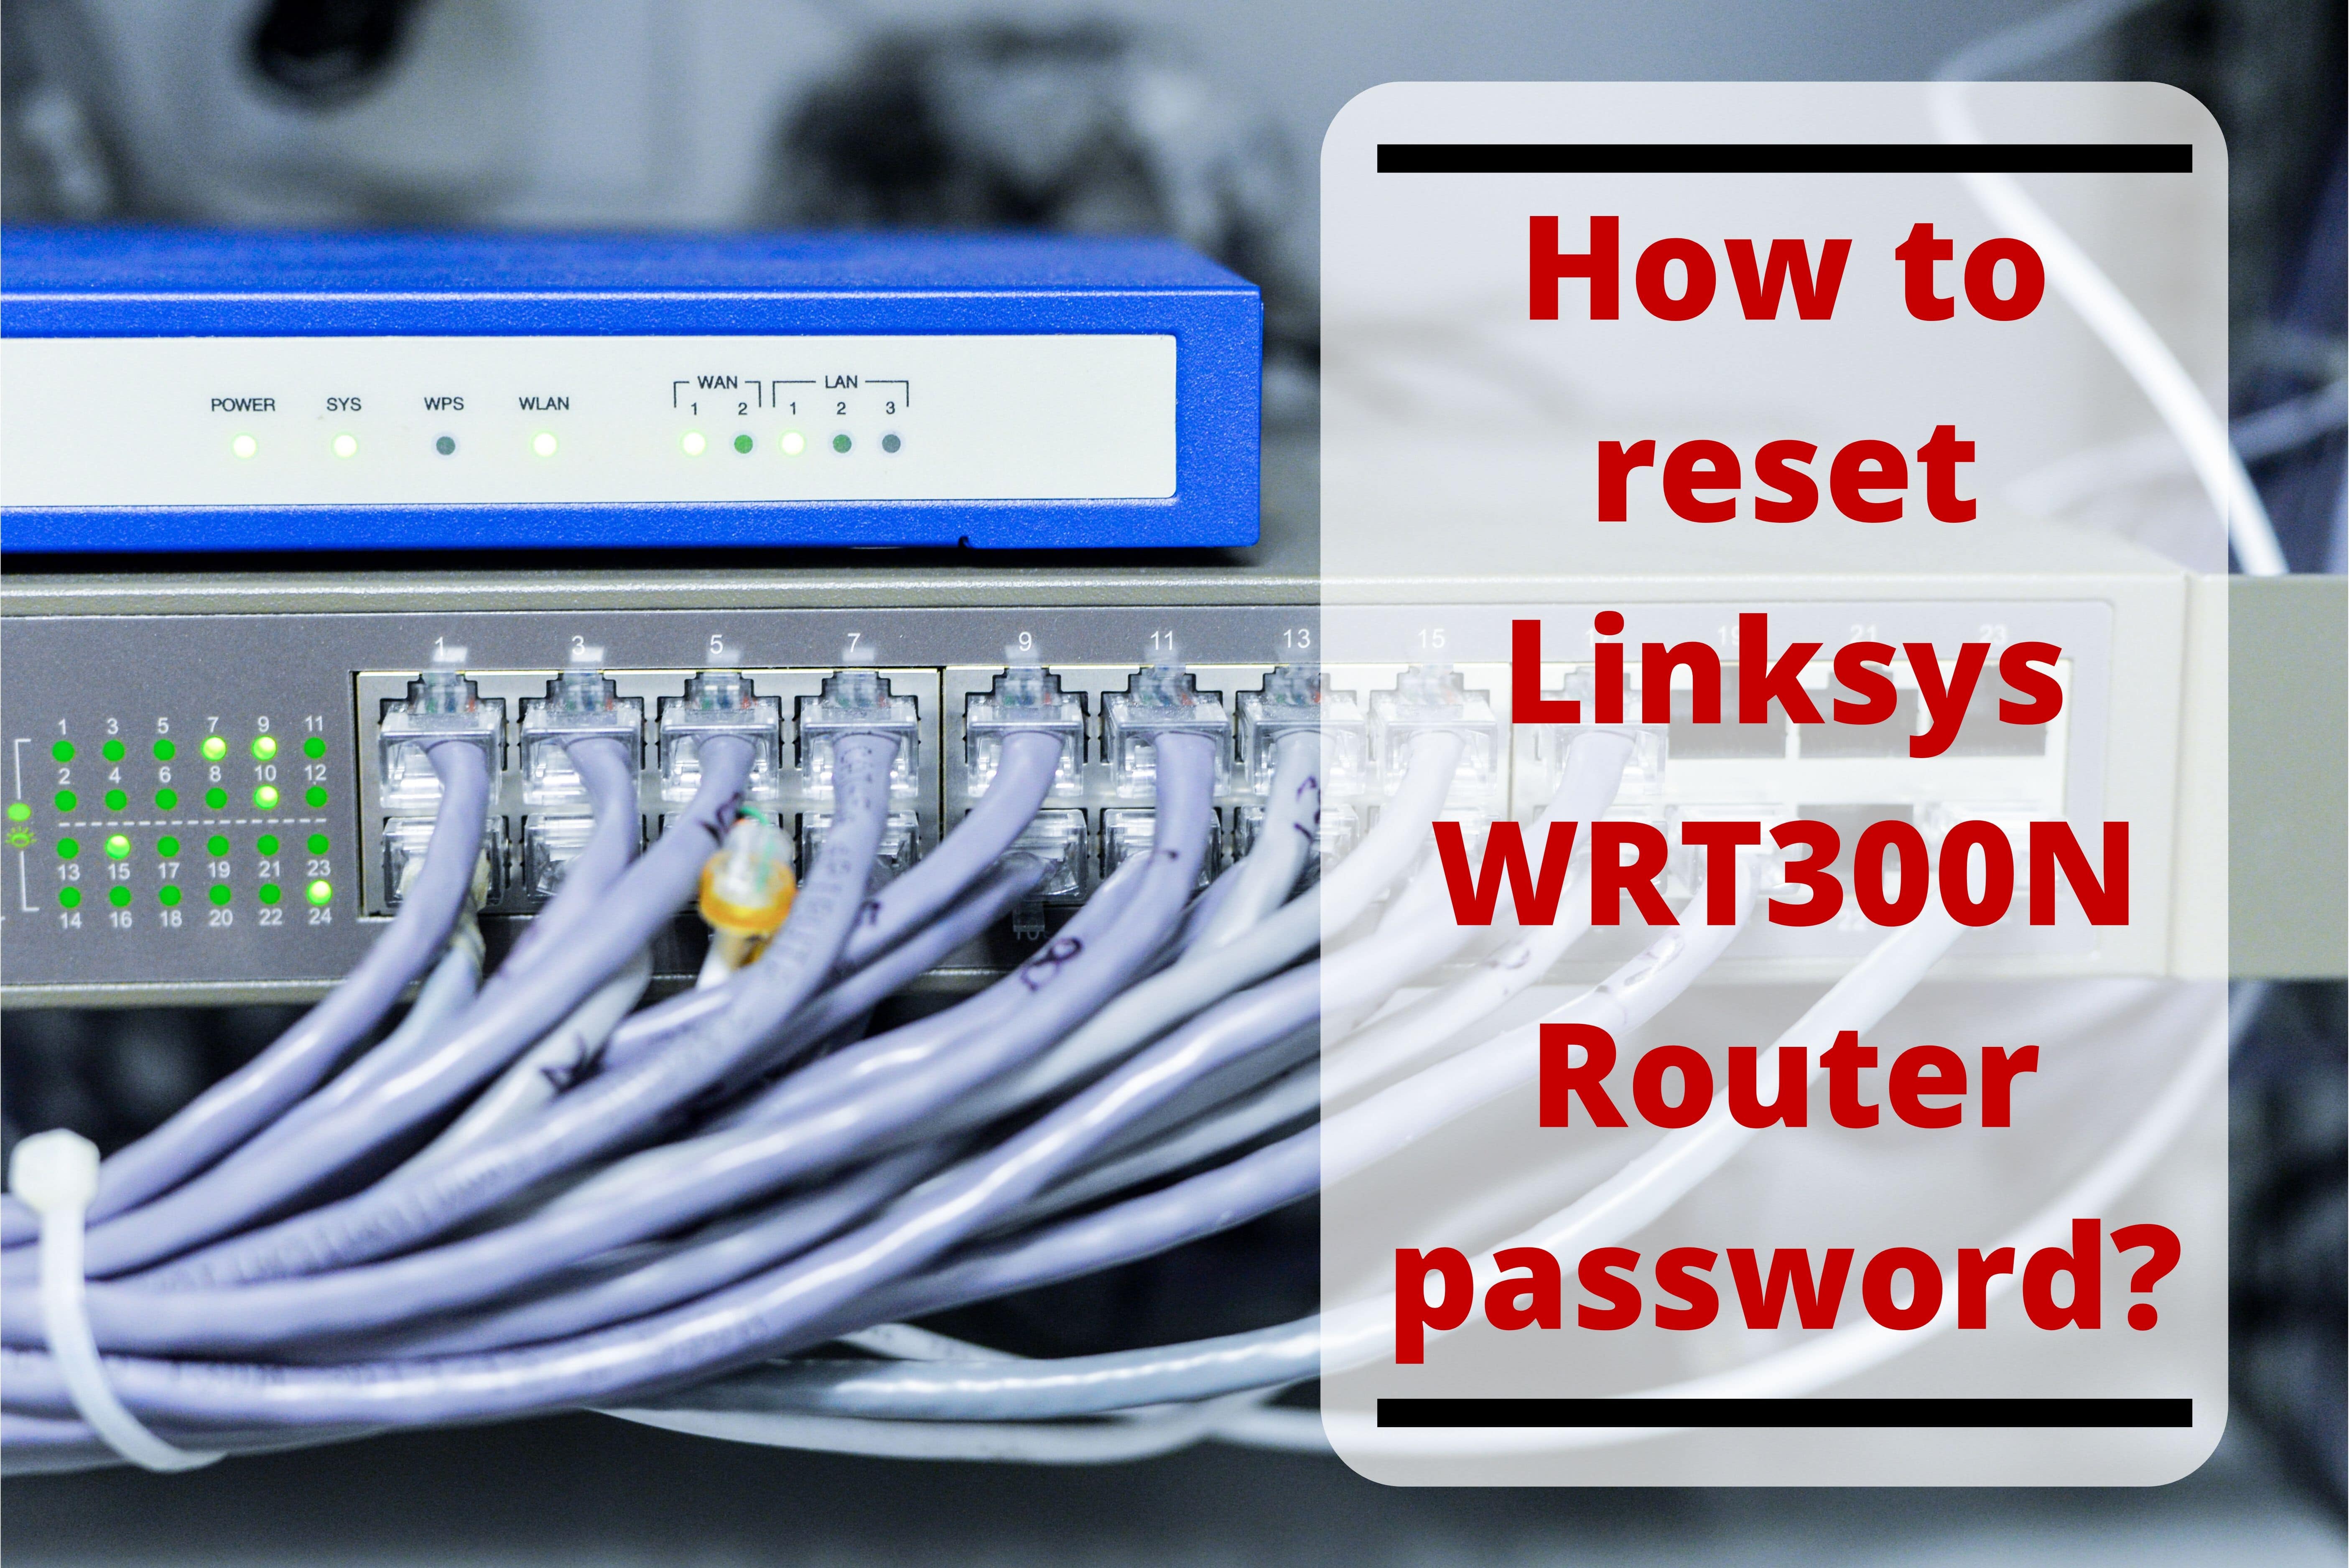 2019-10-30-10-46-37How to reset Linksys WRT300N Router password_-min